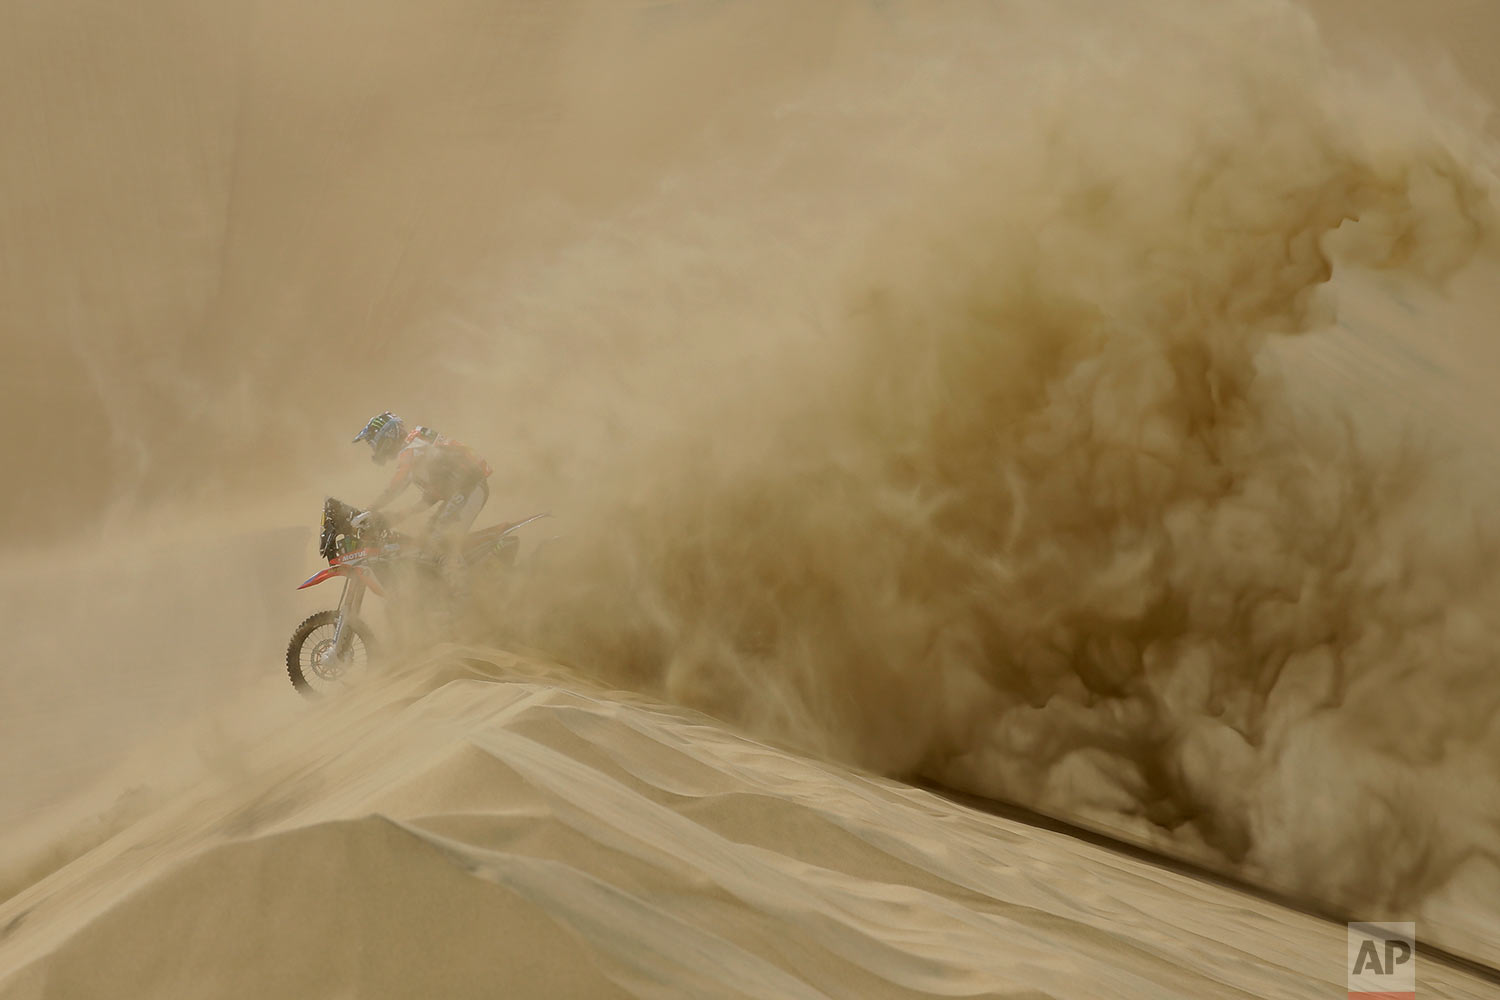  In this Saturday, Jan. 6, 2018 photo, Ricky Brabec, of the United States, rides his Honda motorbike during the first stage of the Dakar Rally between Lima and Pisco, Peru. (AP Photo/Ricardo Mazalan)&nbsp; |&nbsp; See these photos on AP Images  